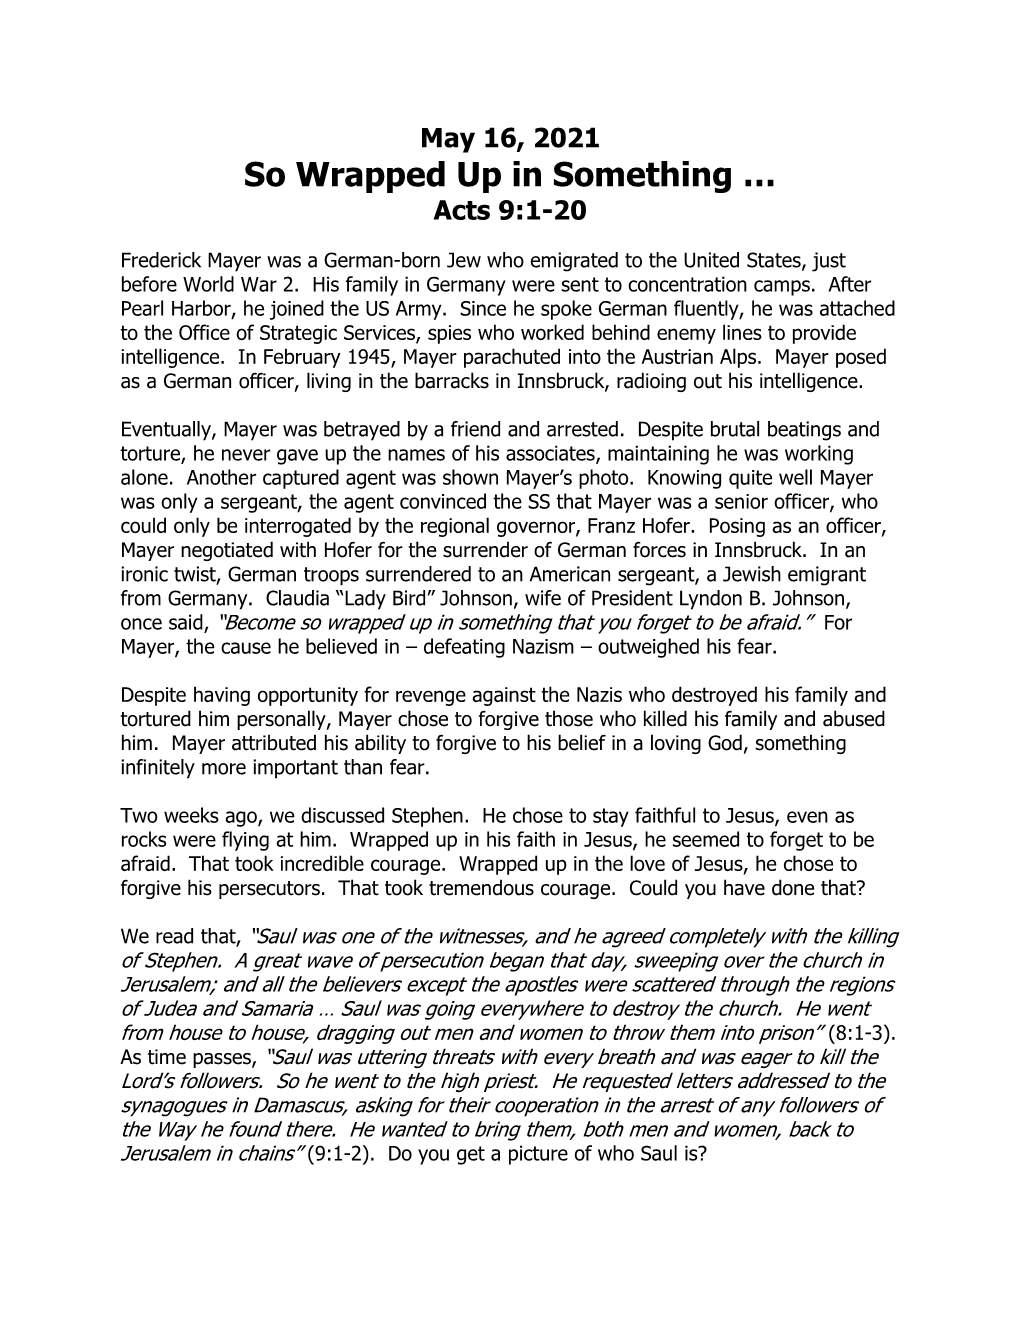 So Wrapped up in Something … Acts 9:1-20